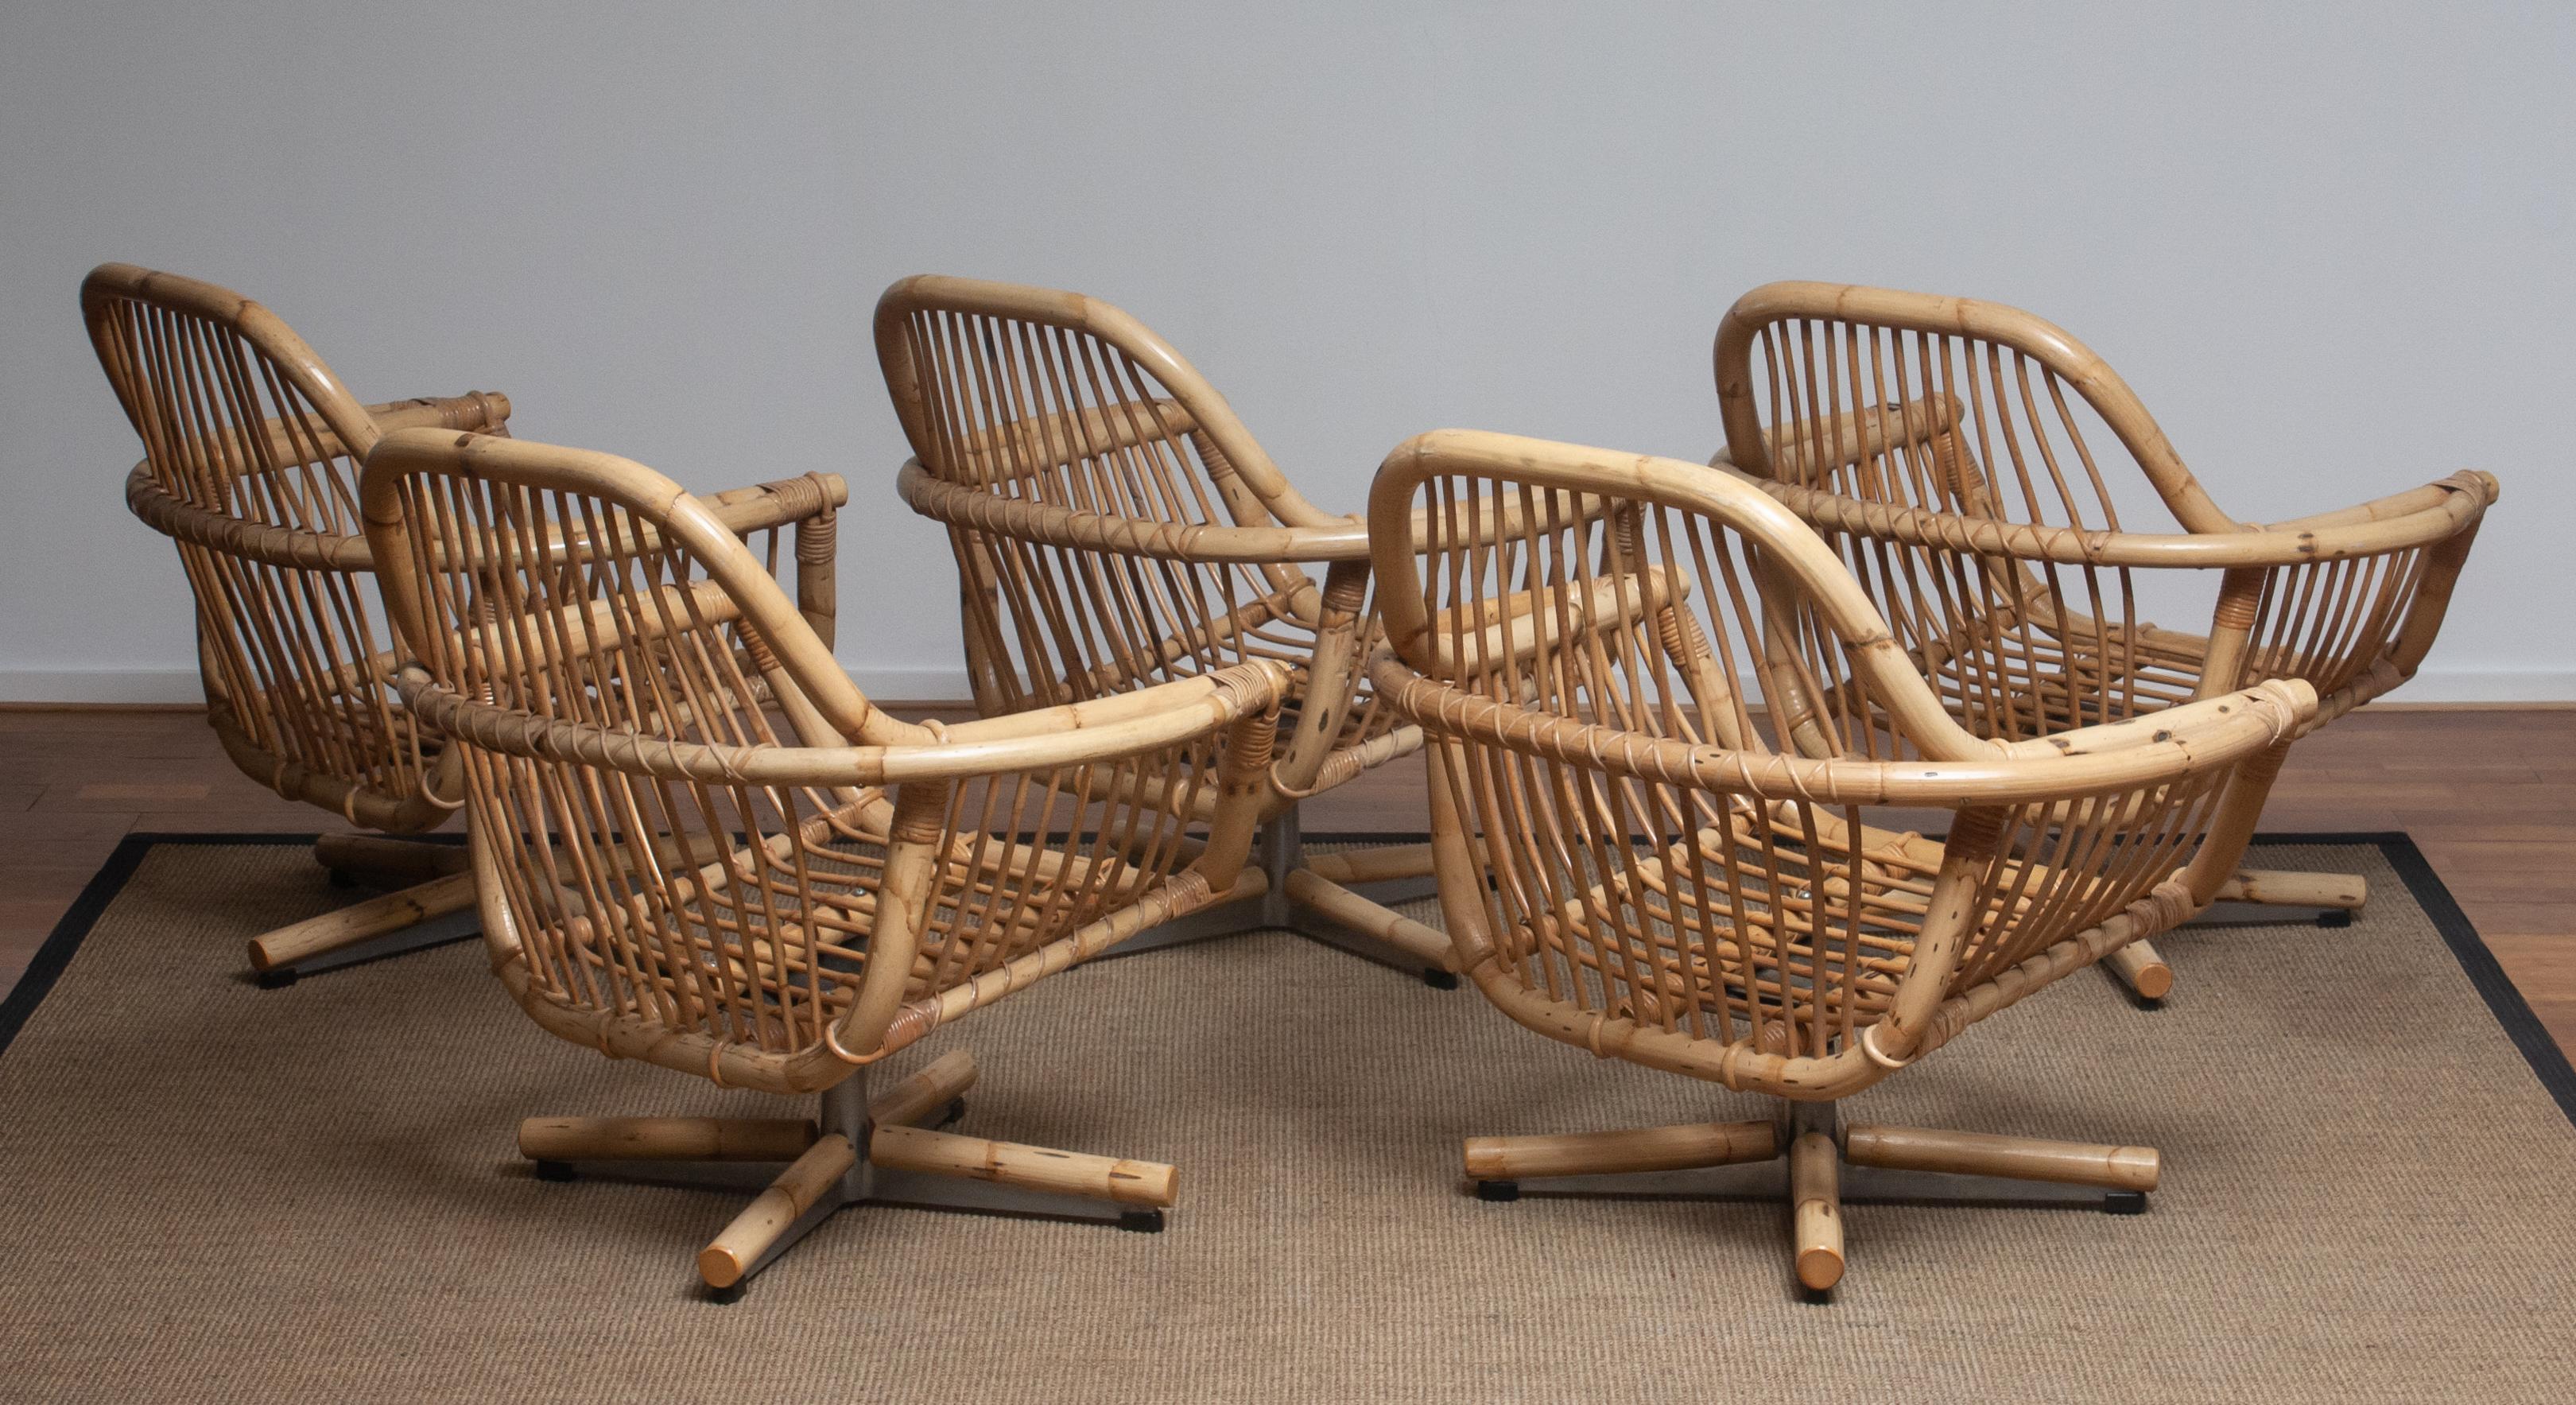 1960s Rattan Garden Set / Lounge Set Consist Five Swivel Chairs and Coffee Table 2